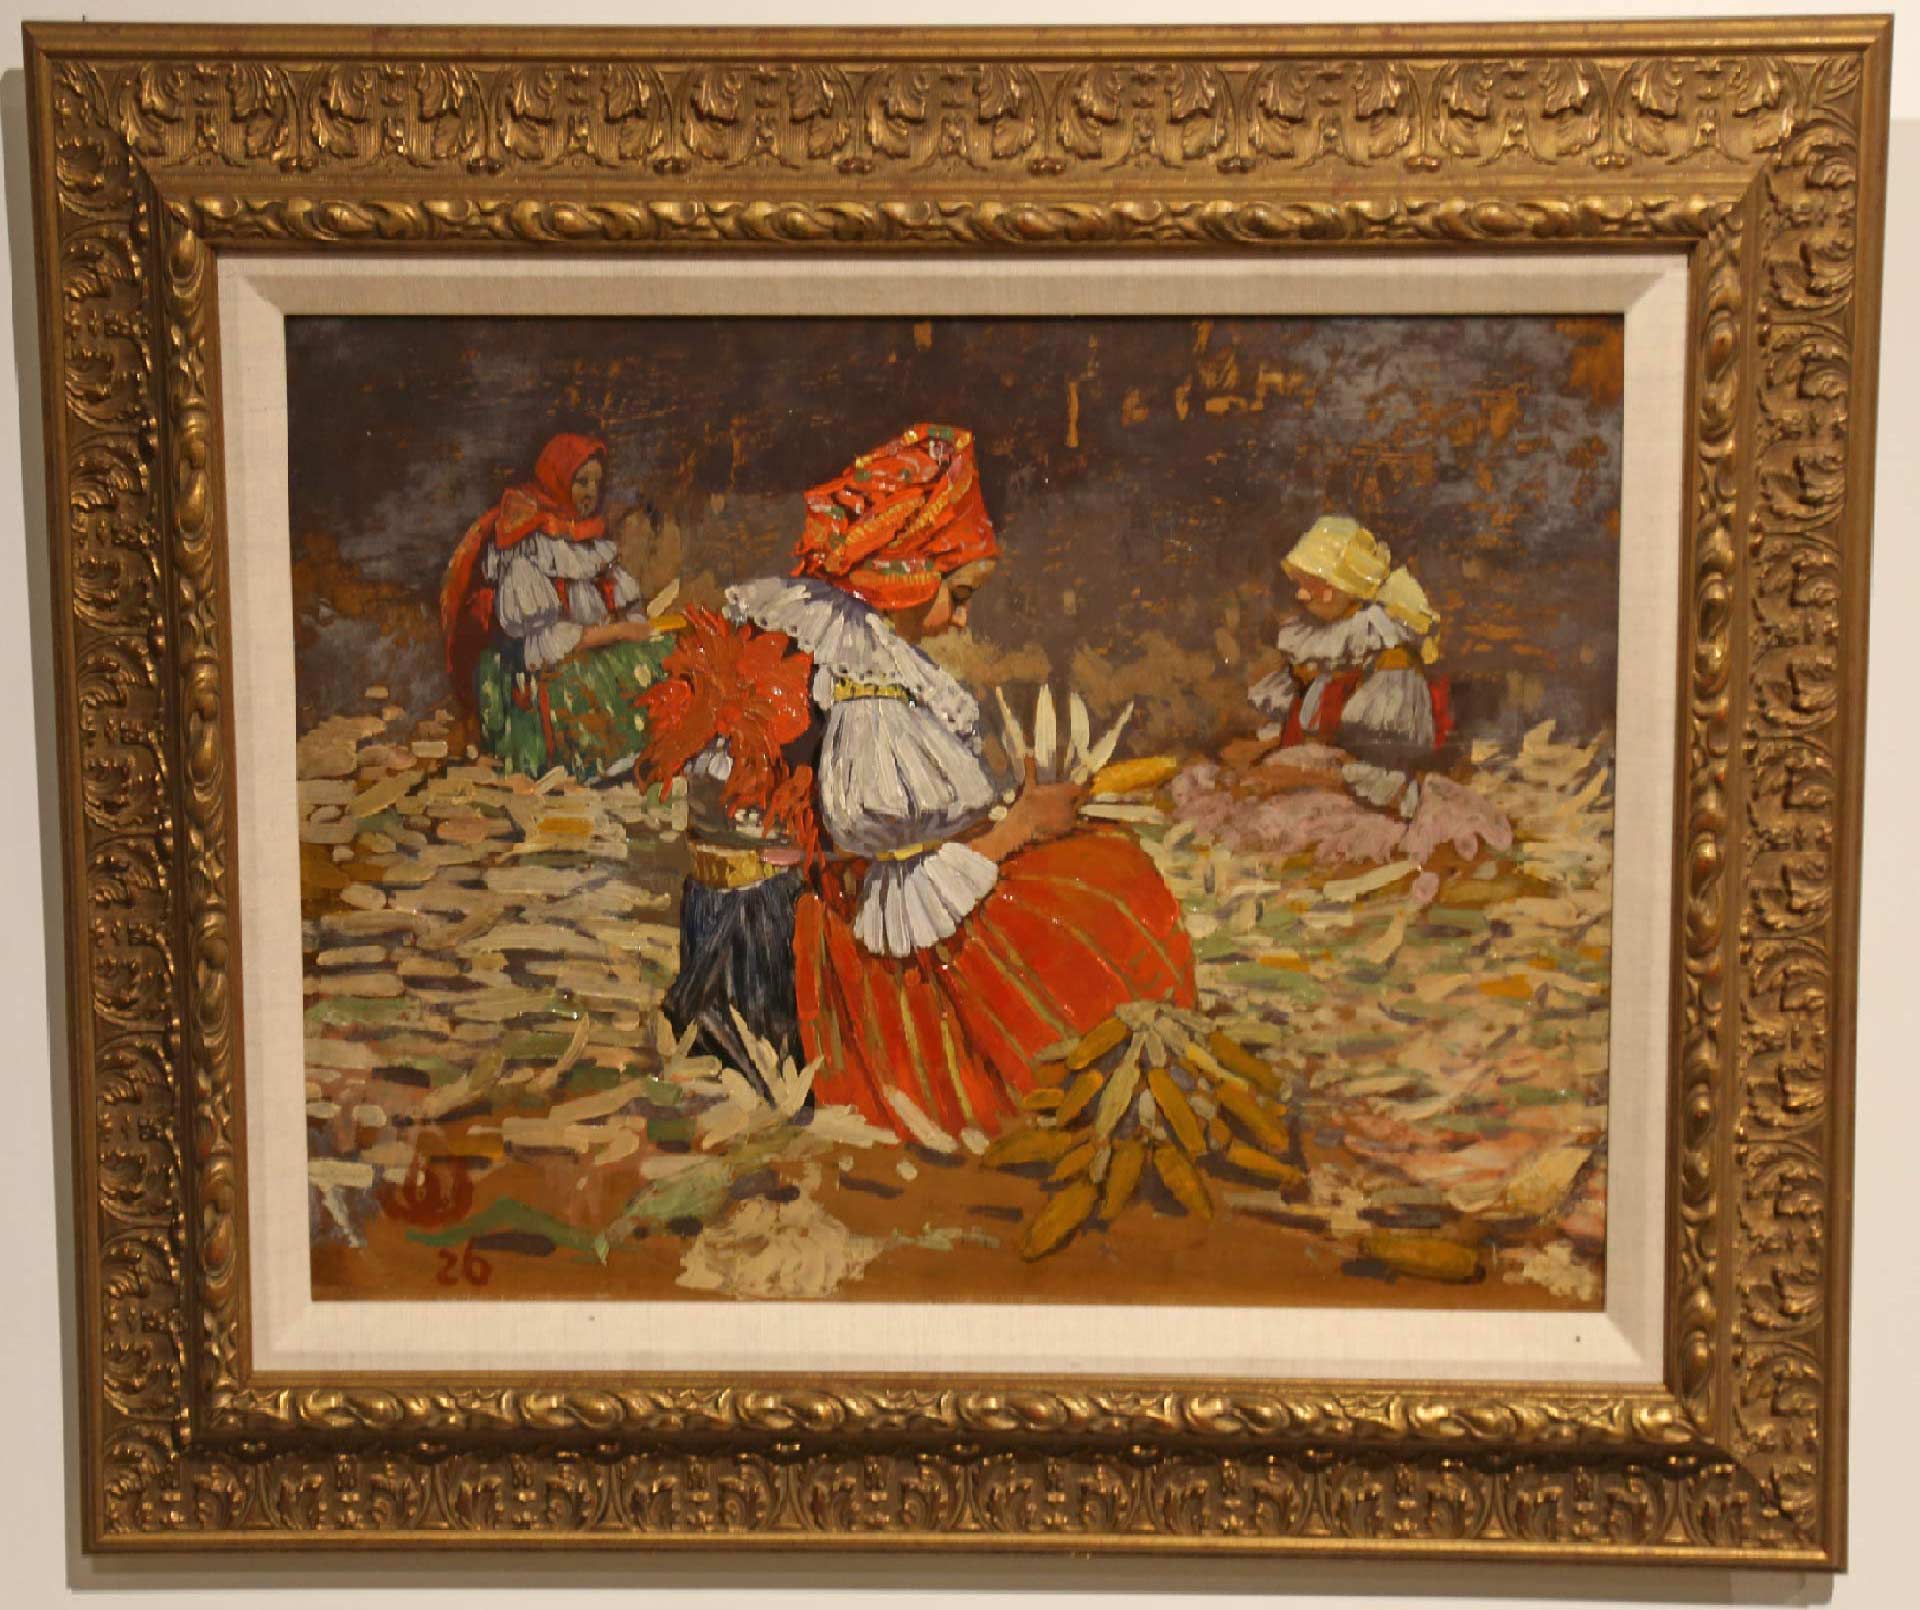 painting of women working in a field wearing dresses